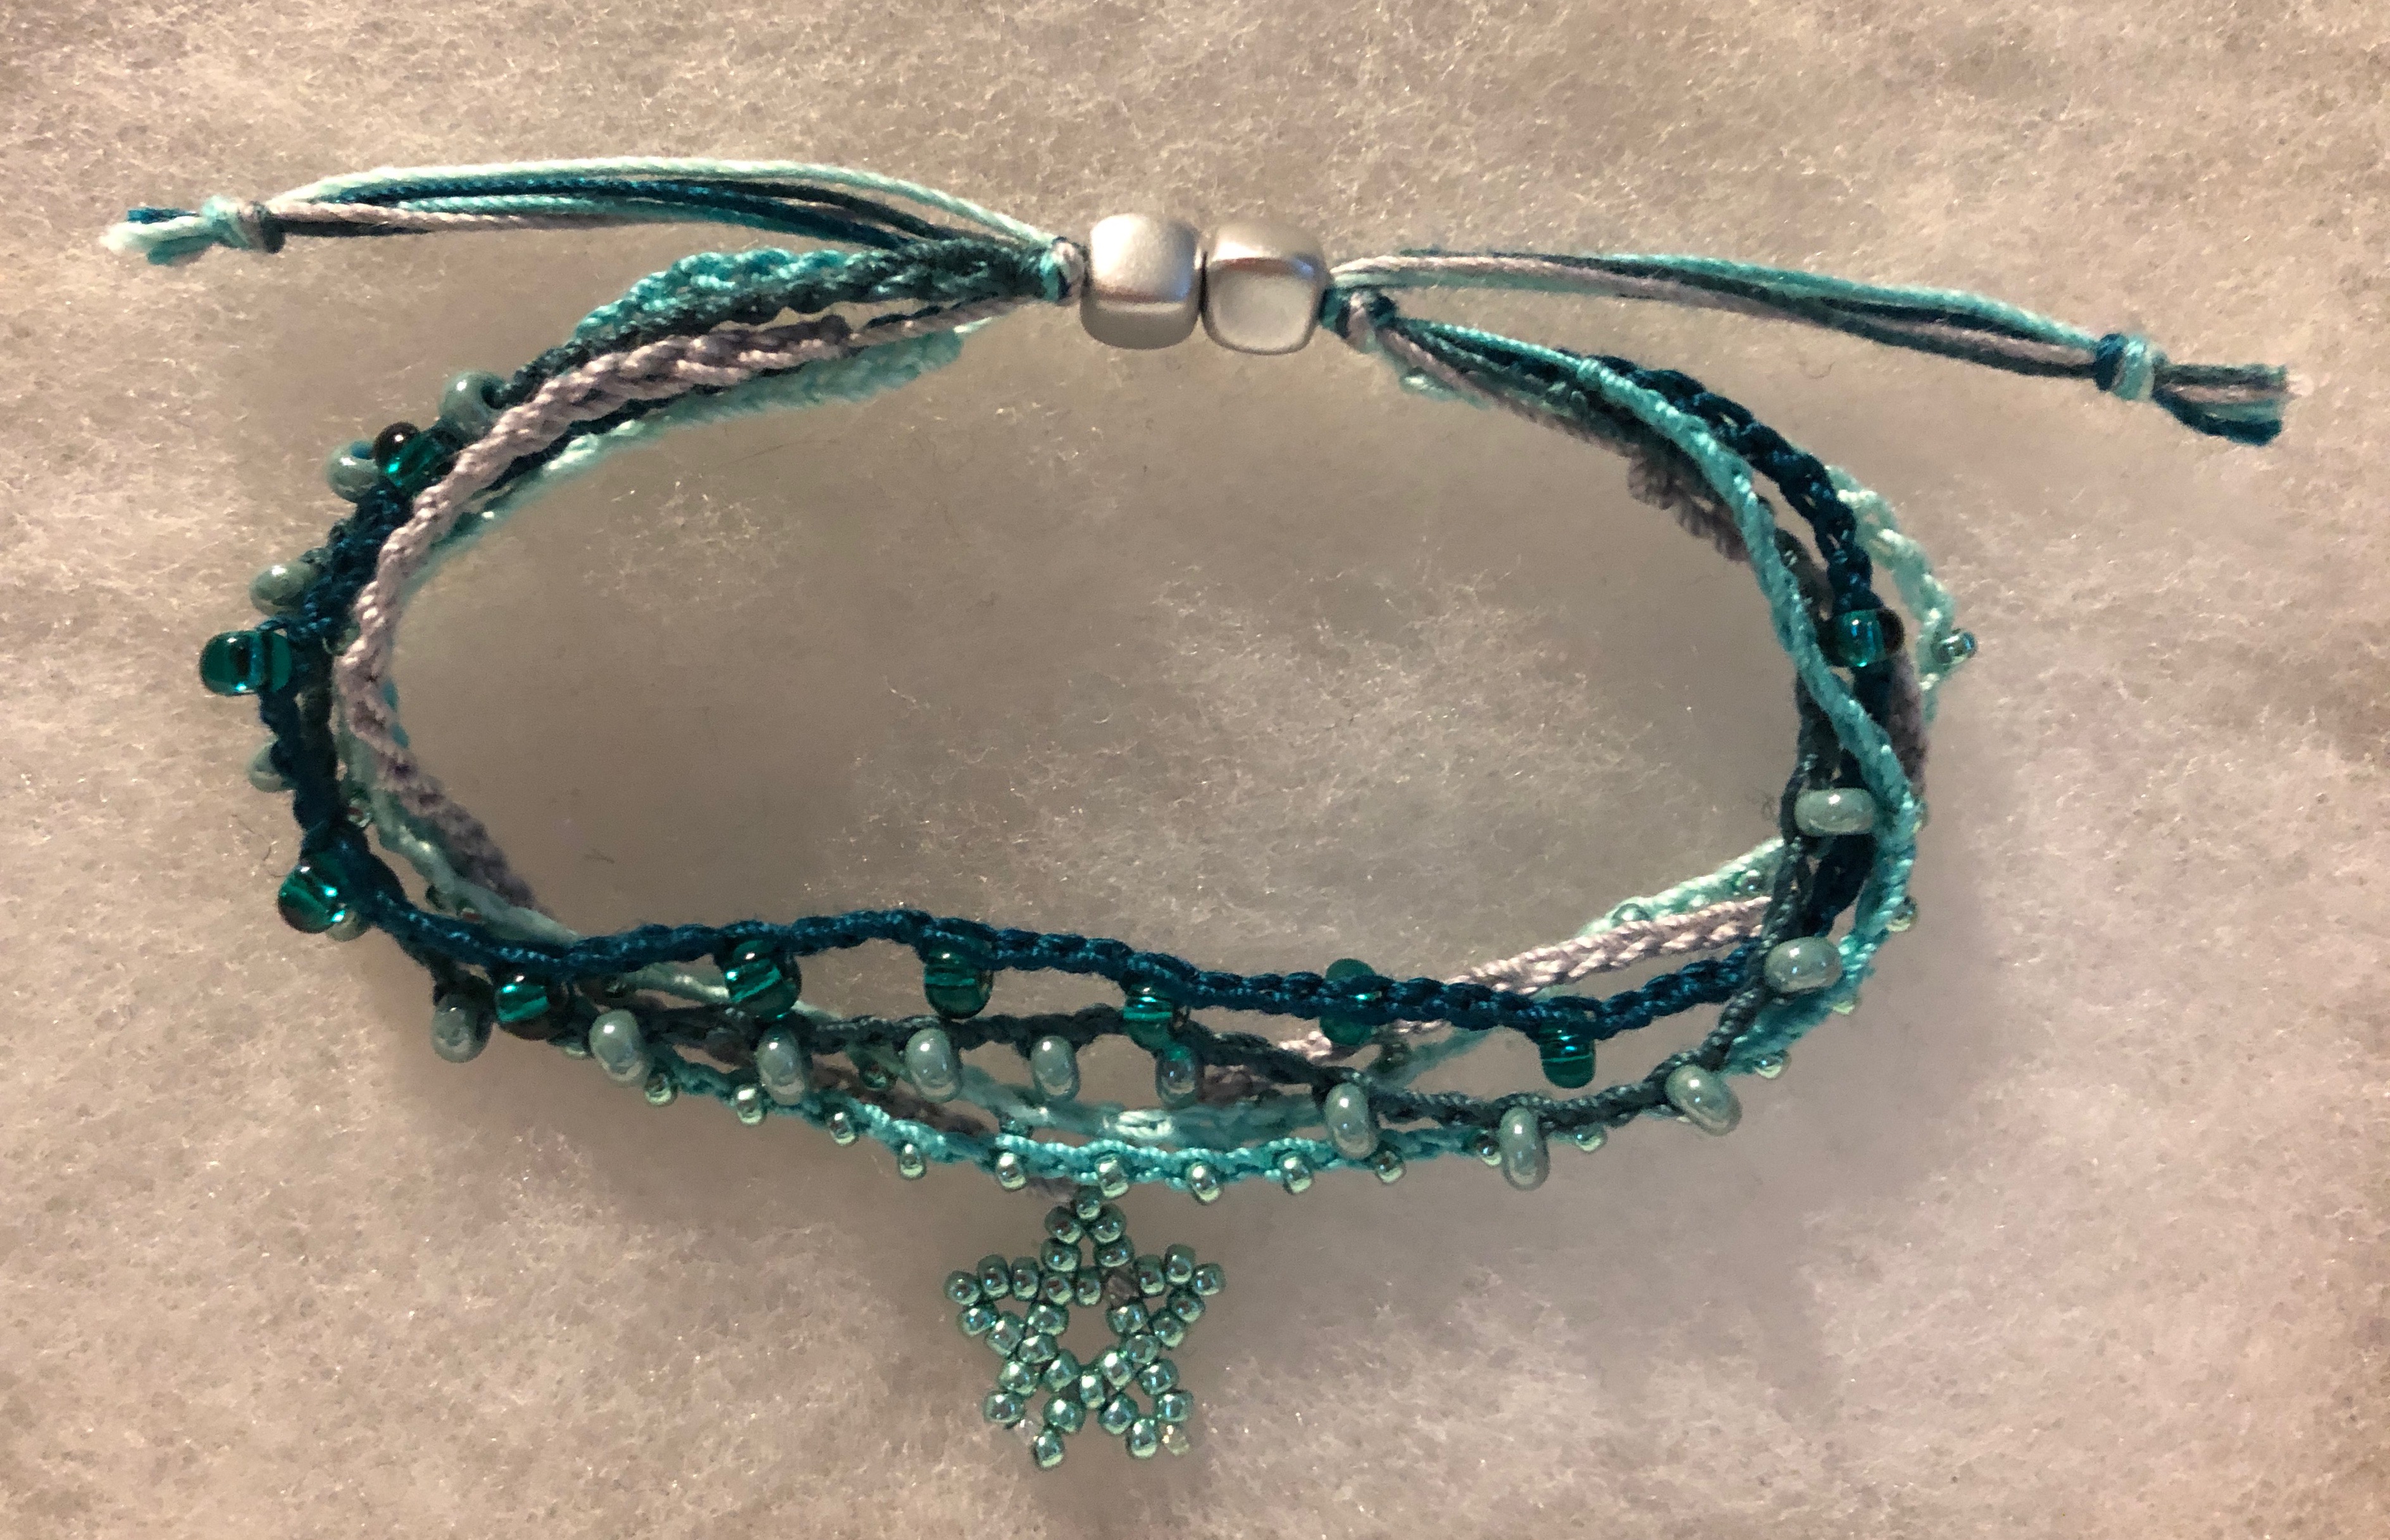 A handmade, crocheted, adjustable bracelet made with 5 strands of crocheted cotton and glass bead with and central beaded star hanging decoration. In a gradient of green shades.